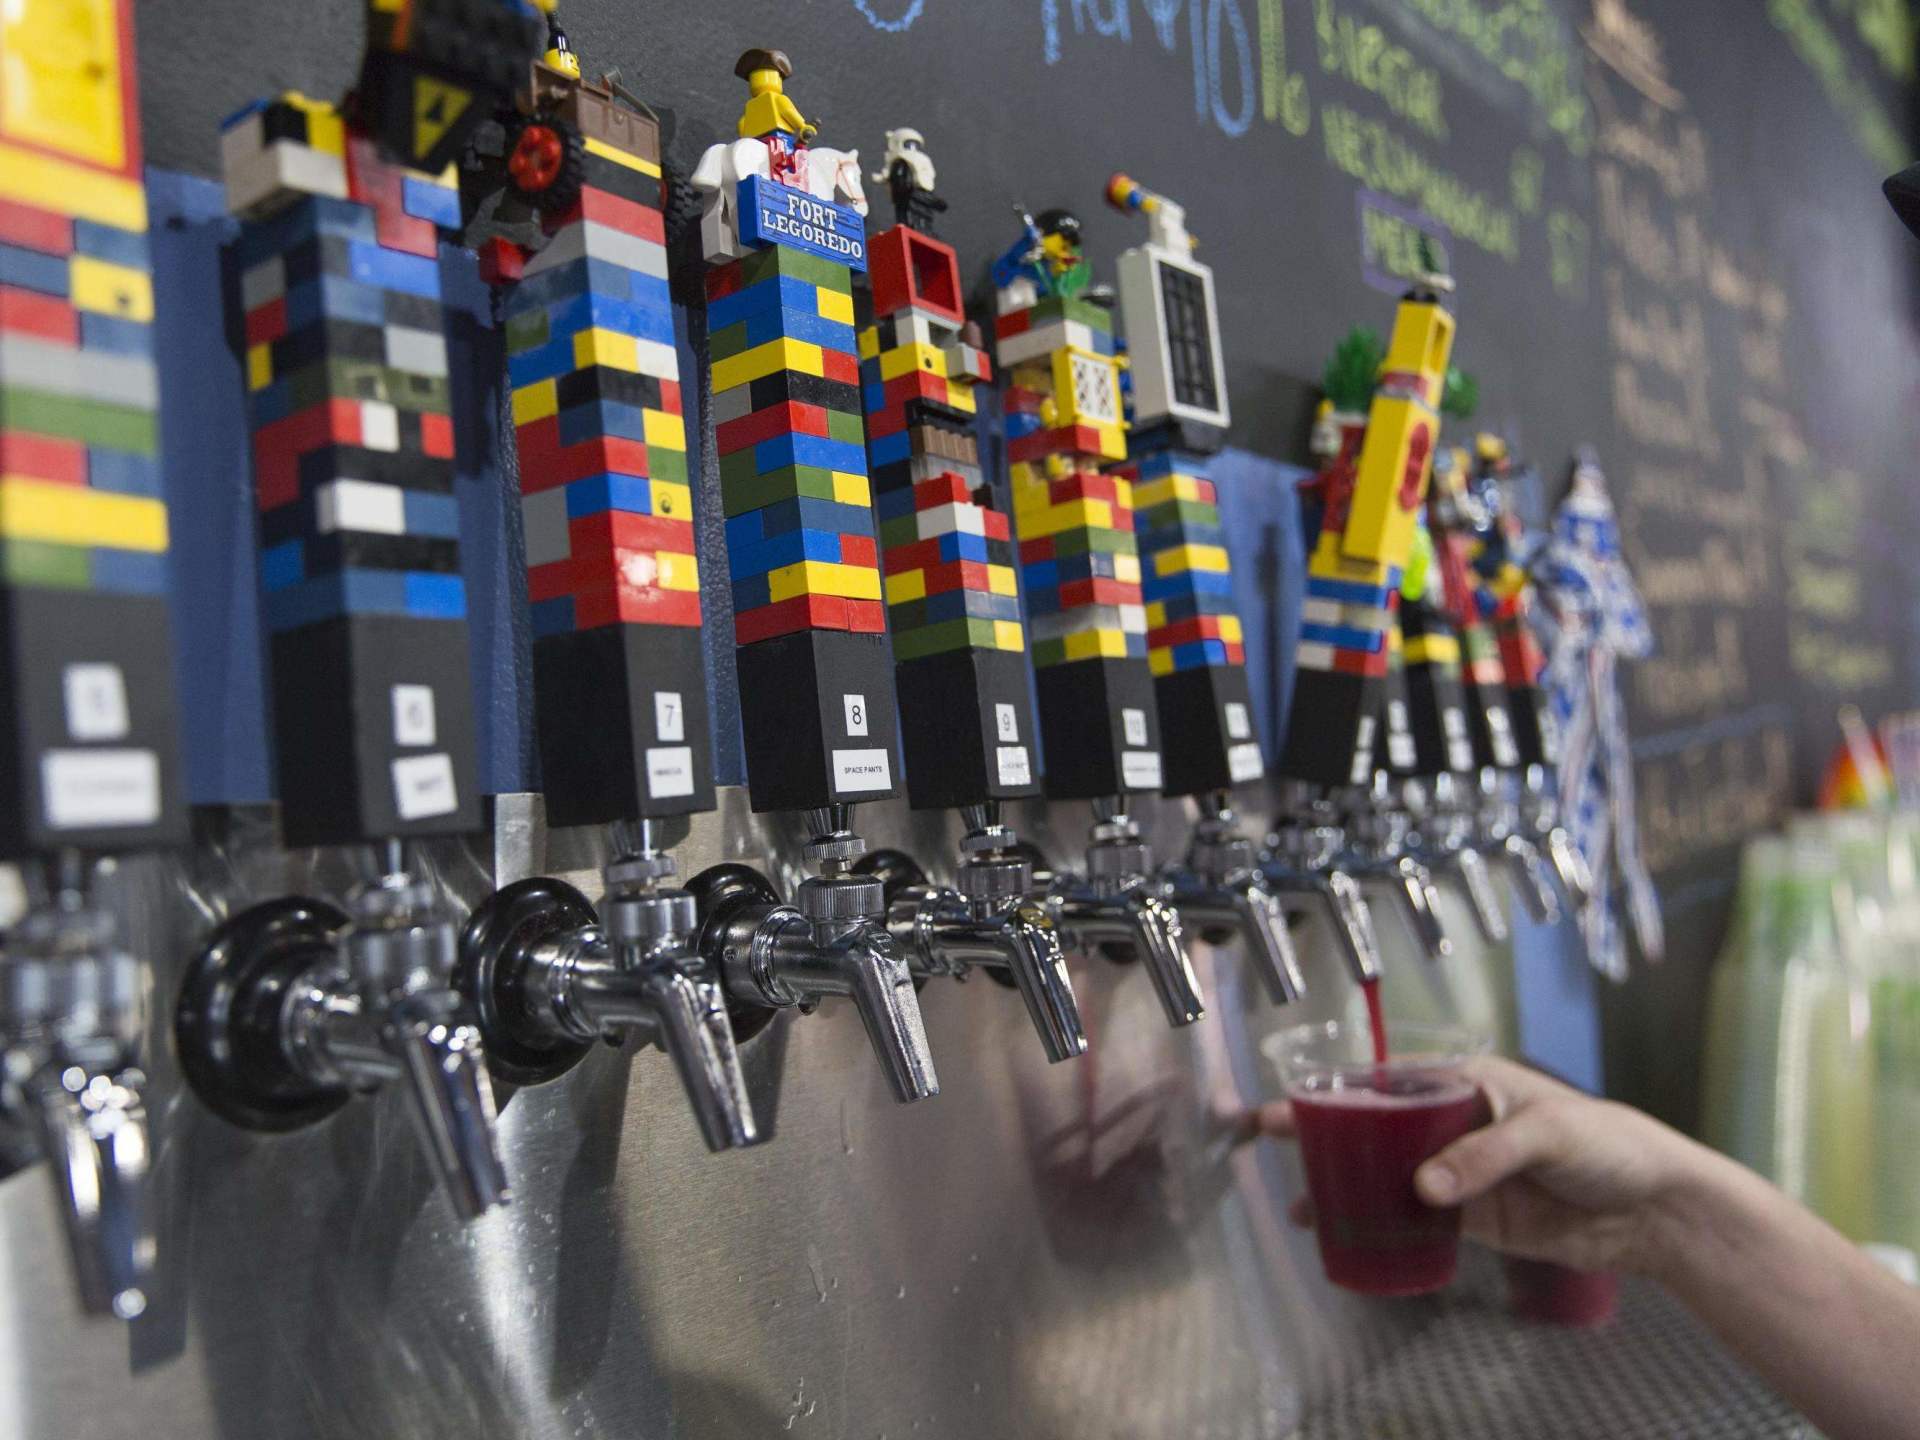 The Overflowing Brewery and its Lego taps are a popular neighborhood spot in Palmetto Park. (Credit: VisitStPeteClearwater.com) 